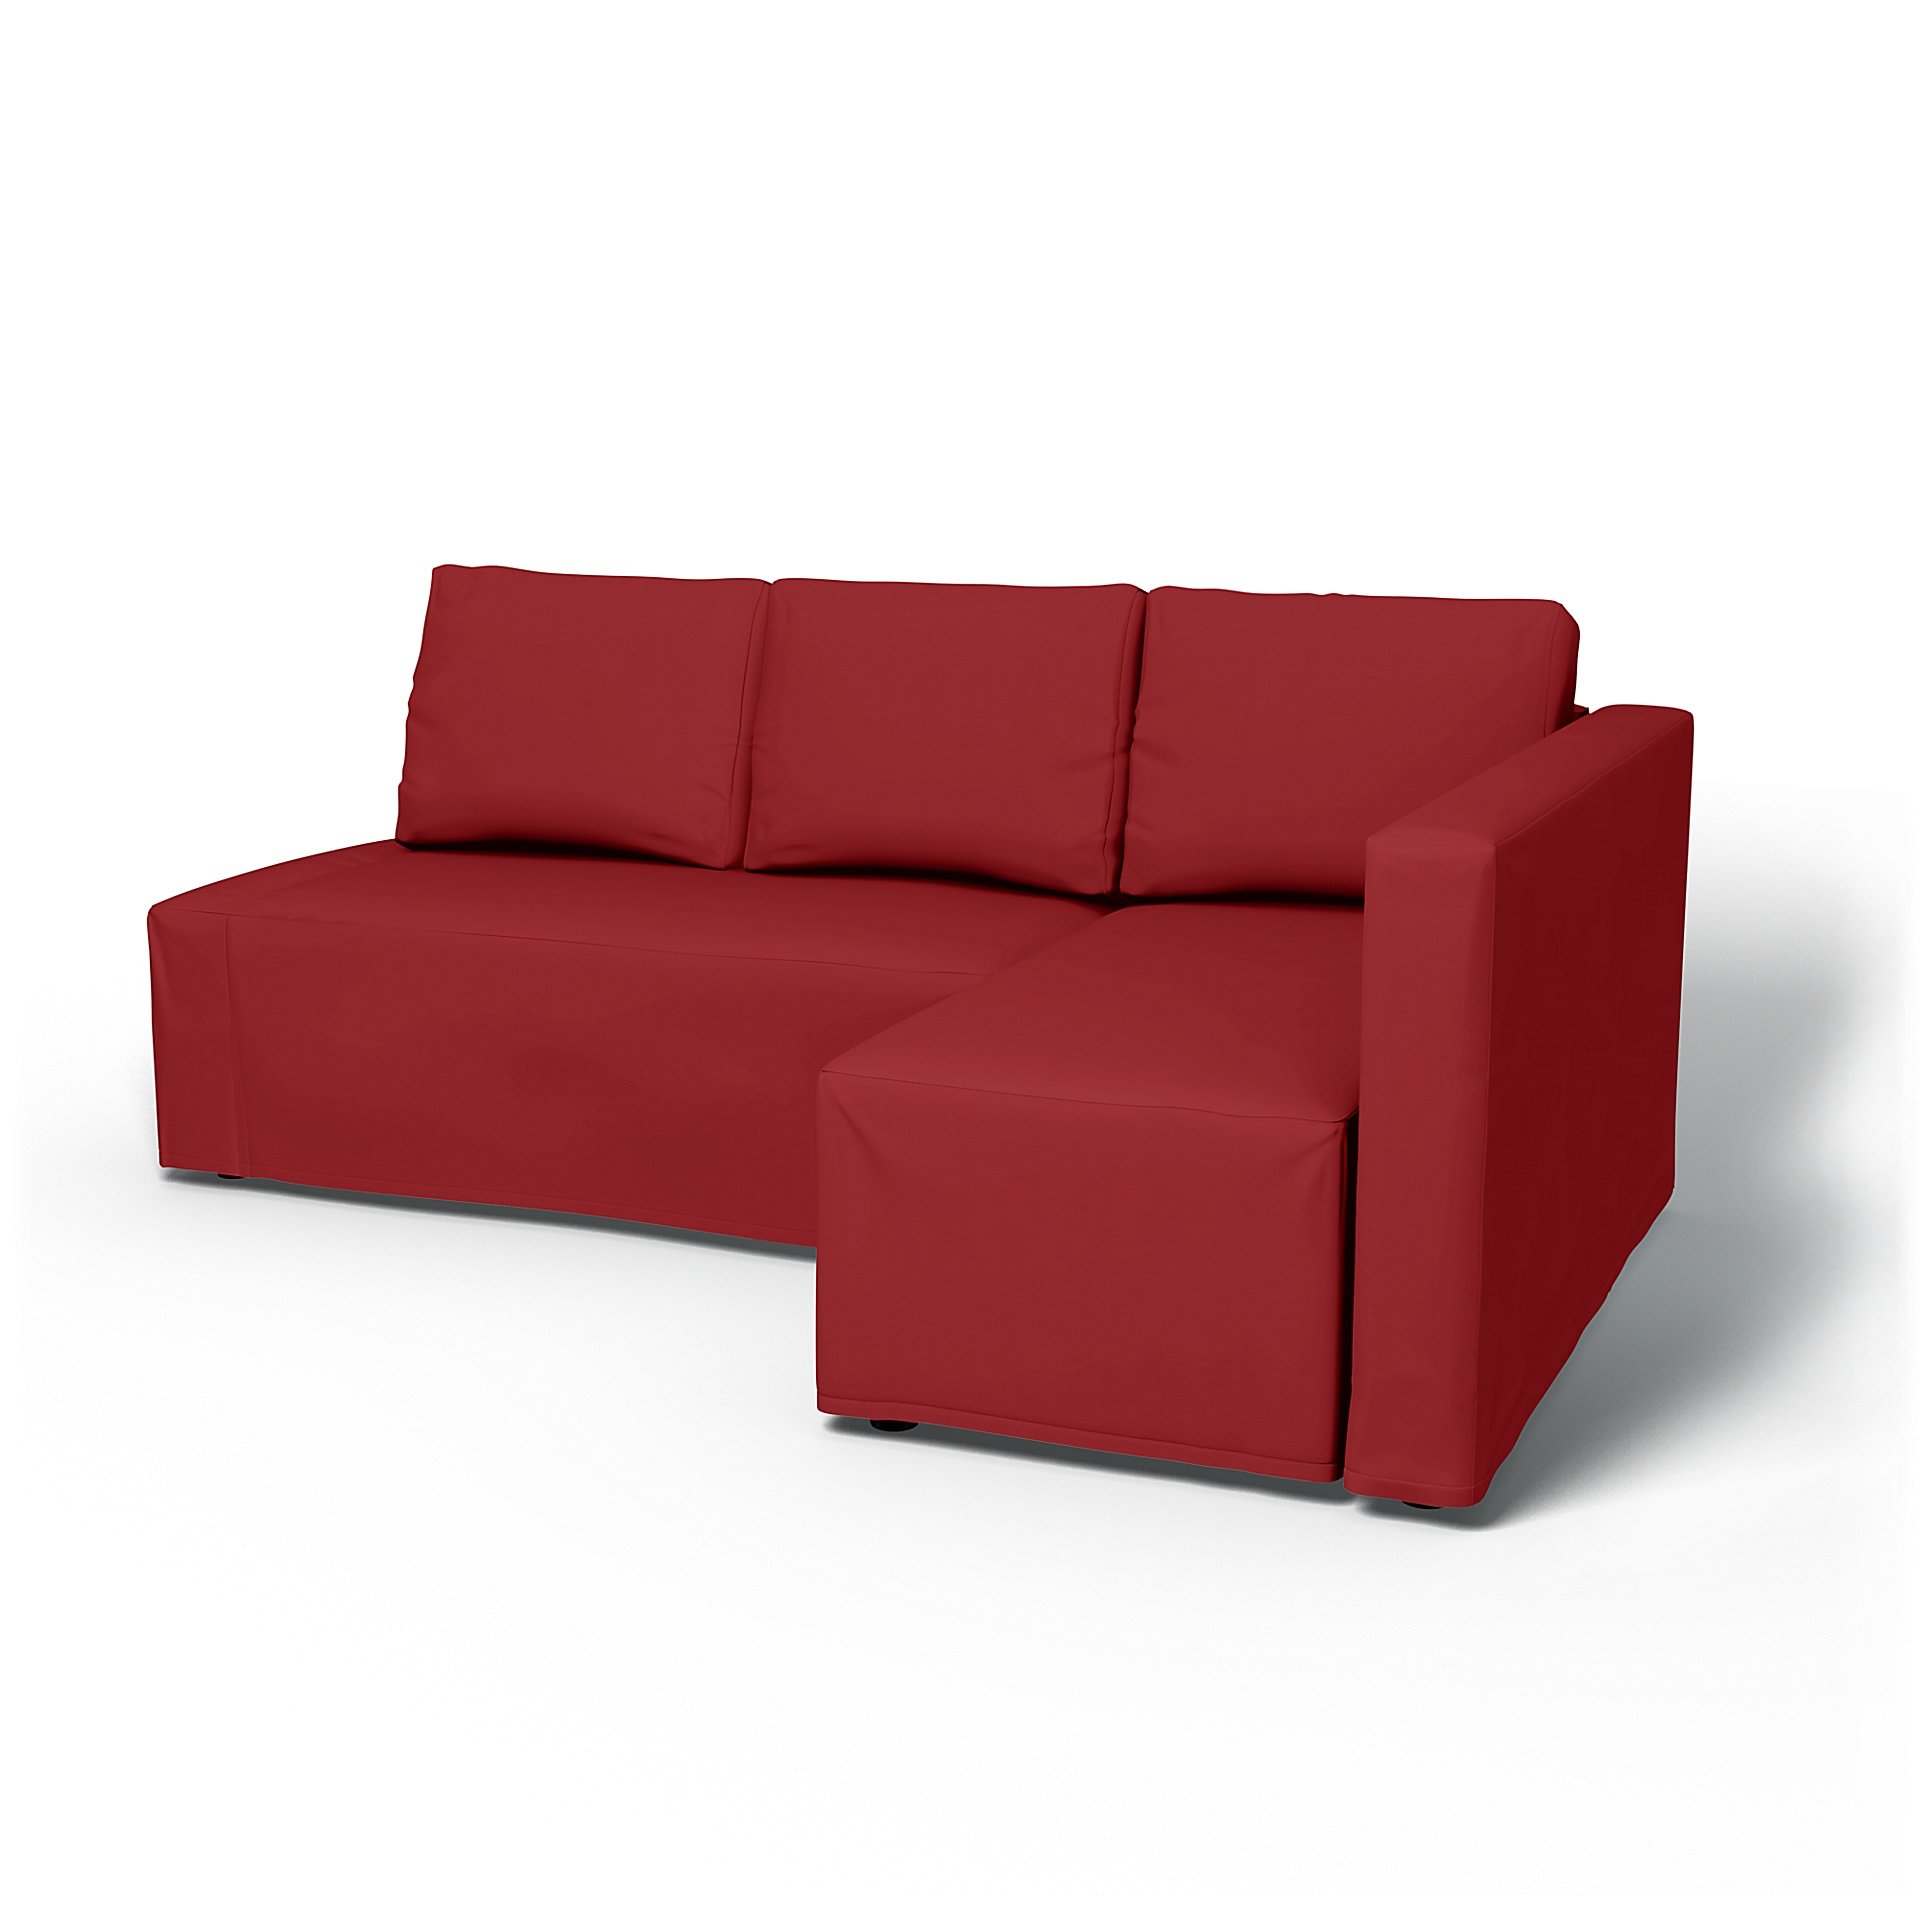 IKEA - Friheten Sofa Bed with Right Chaise Cover, Scarlet Red, Cotton - Bemz